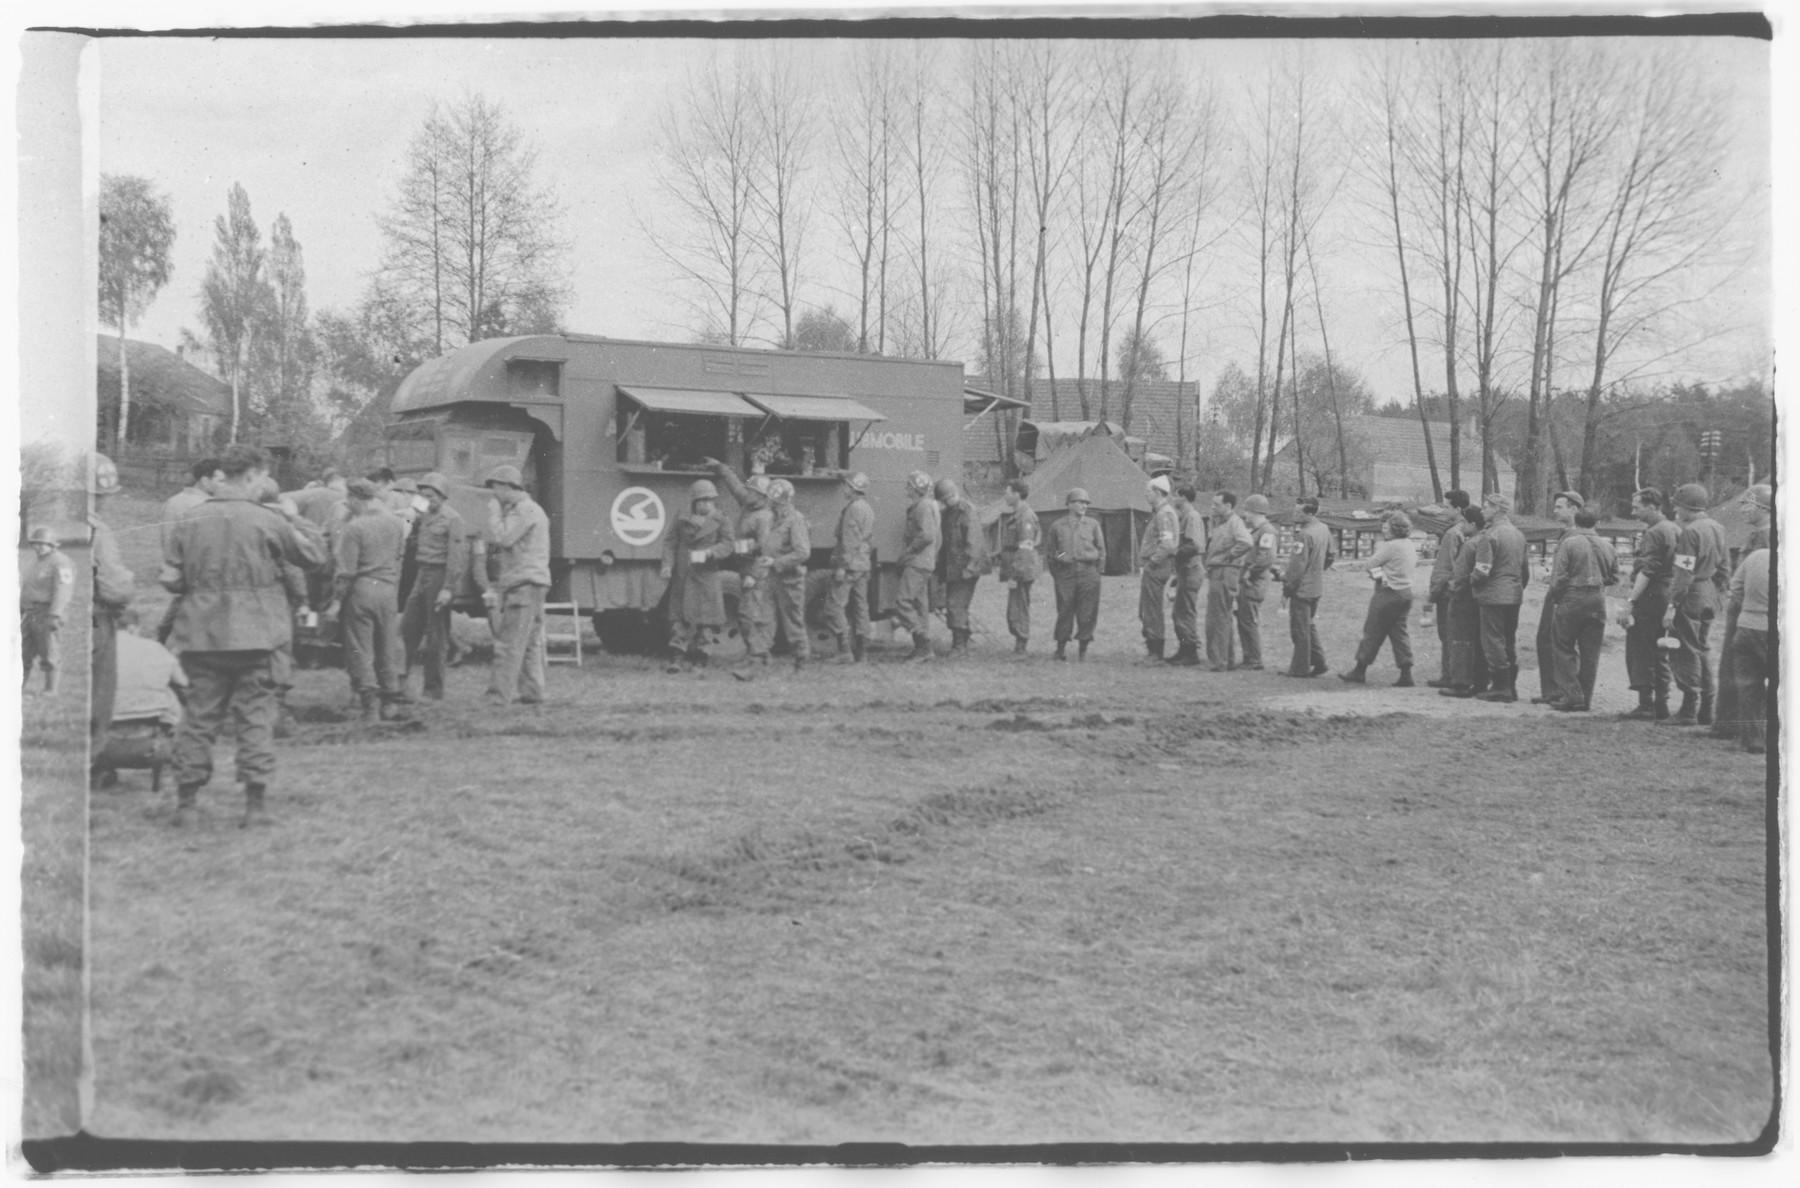 US Army officers from the 91st Evacuation Hospital Unit stand in line for food.